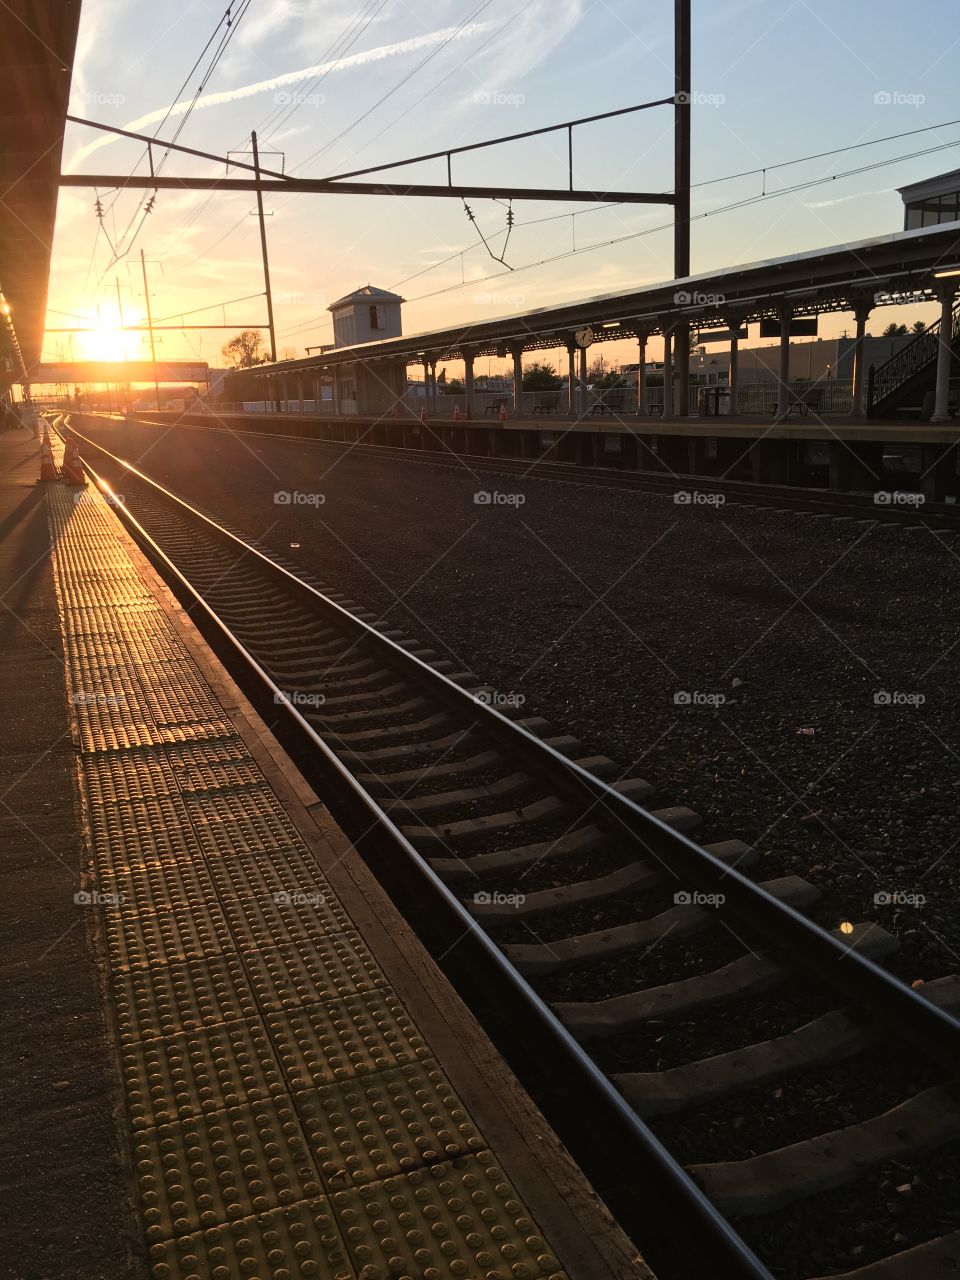 Waiting on the train to arrive while the sun sets in Lancaster, Pennsylvania 